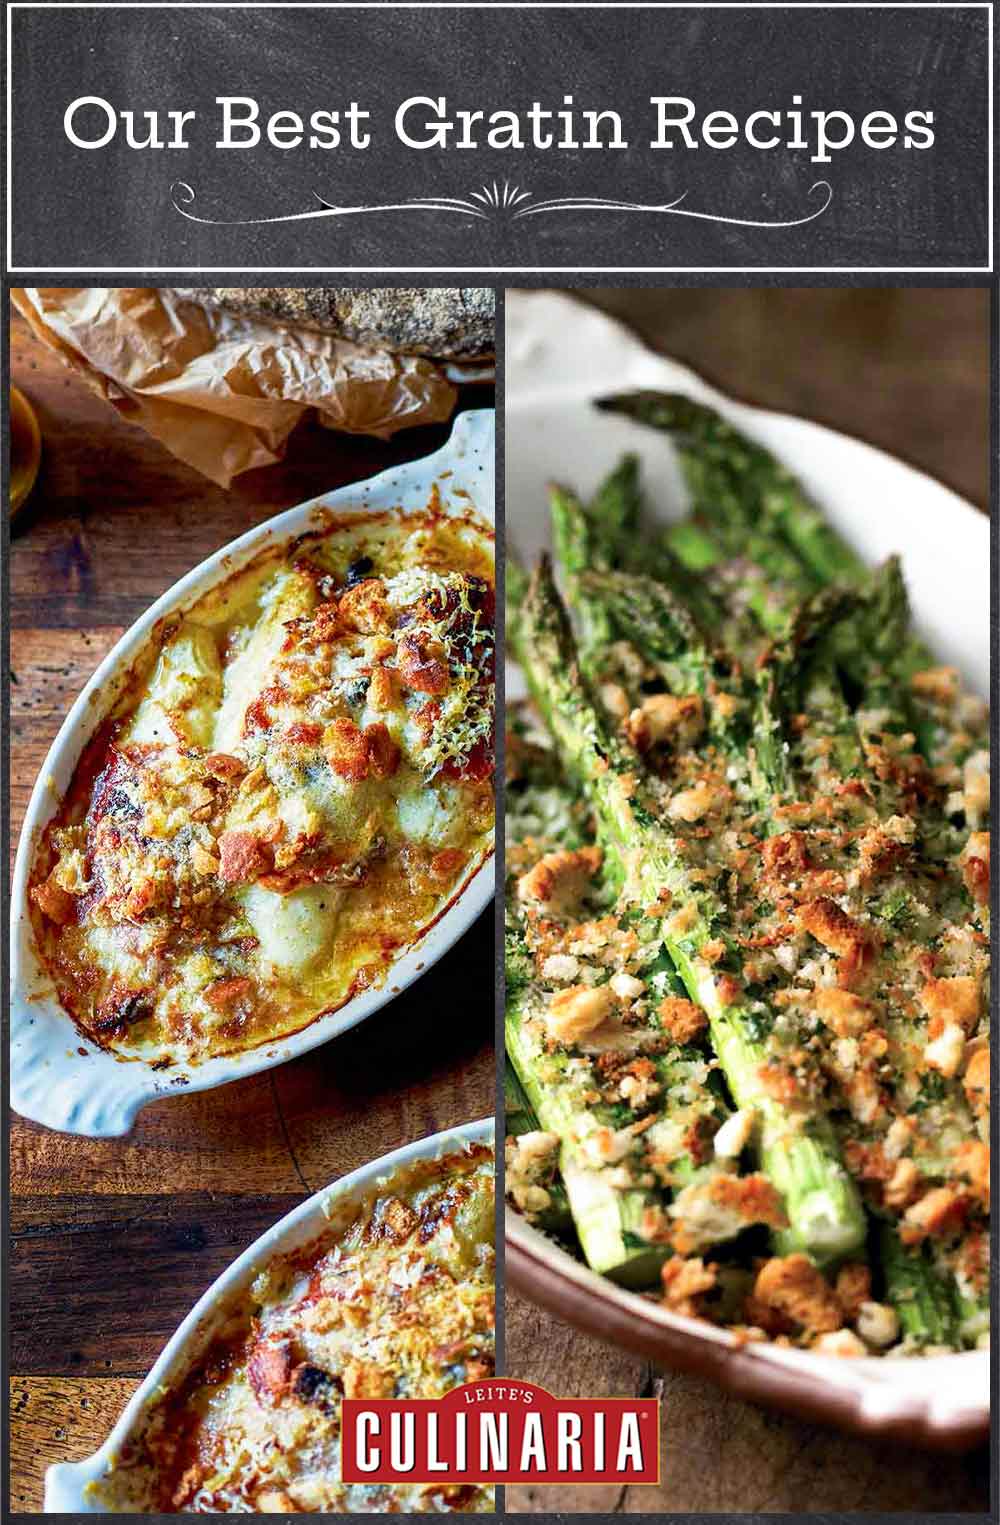 Images of two gratin recipes -- endive gratin and asparagus and asiago gratin.